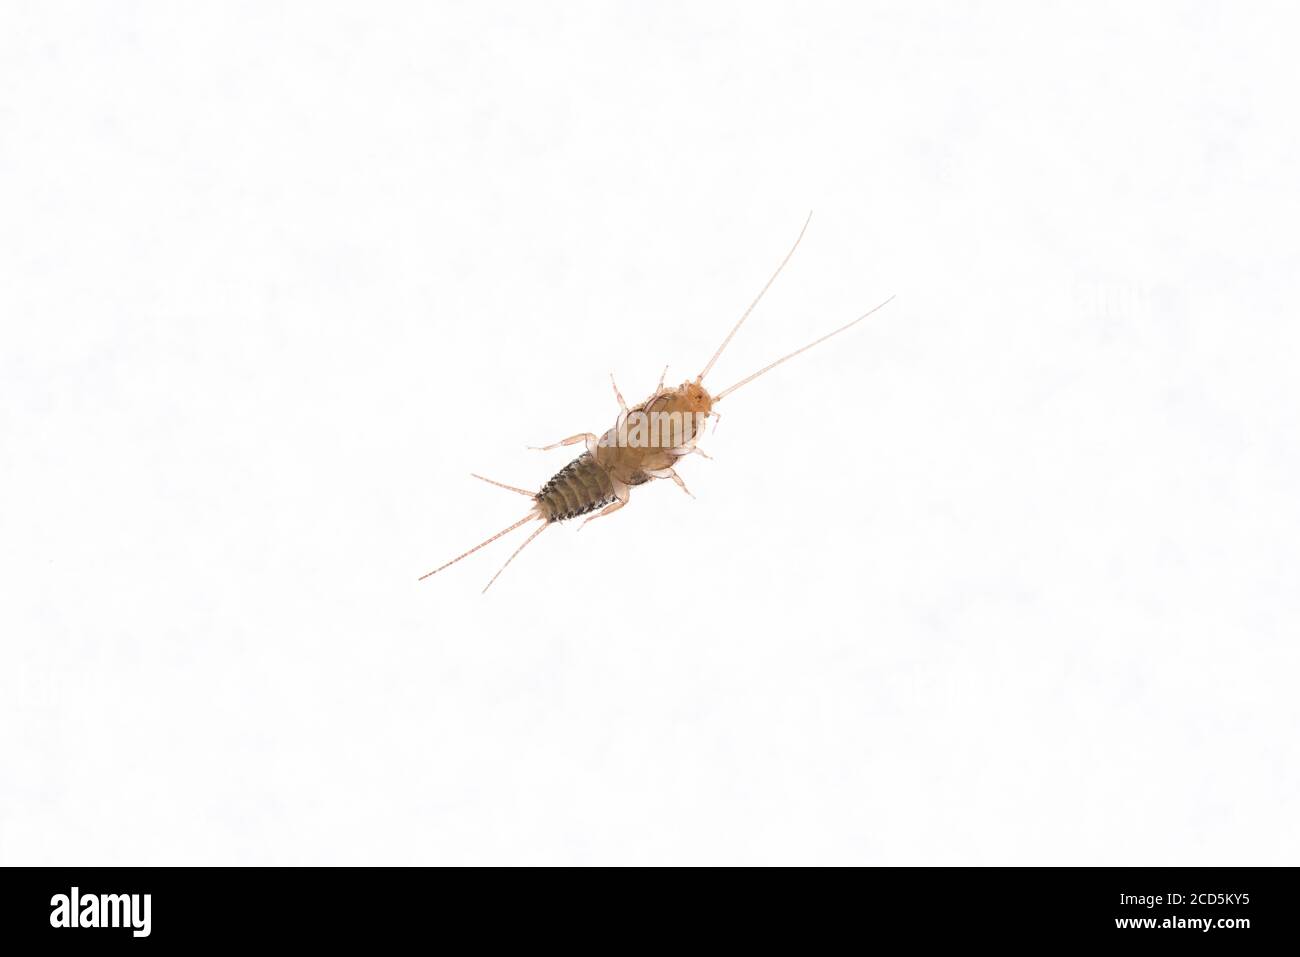 Bottom view of a Firebrat (Thermobia domestica), a species of silverfish.  Insect Lepisma saccharina in normal habitat Stock Photo - Alamy